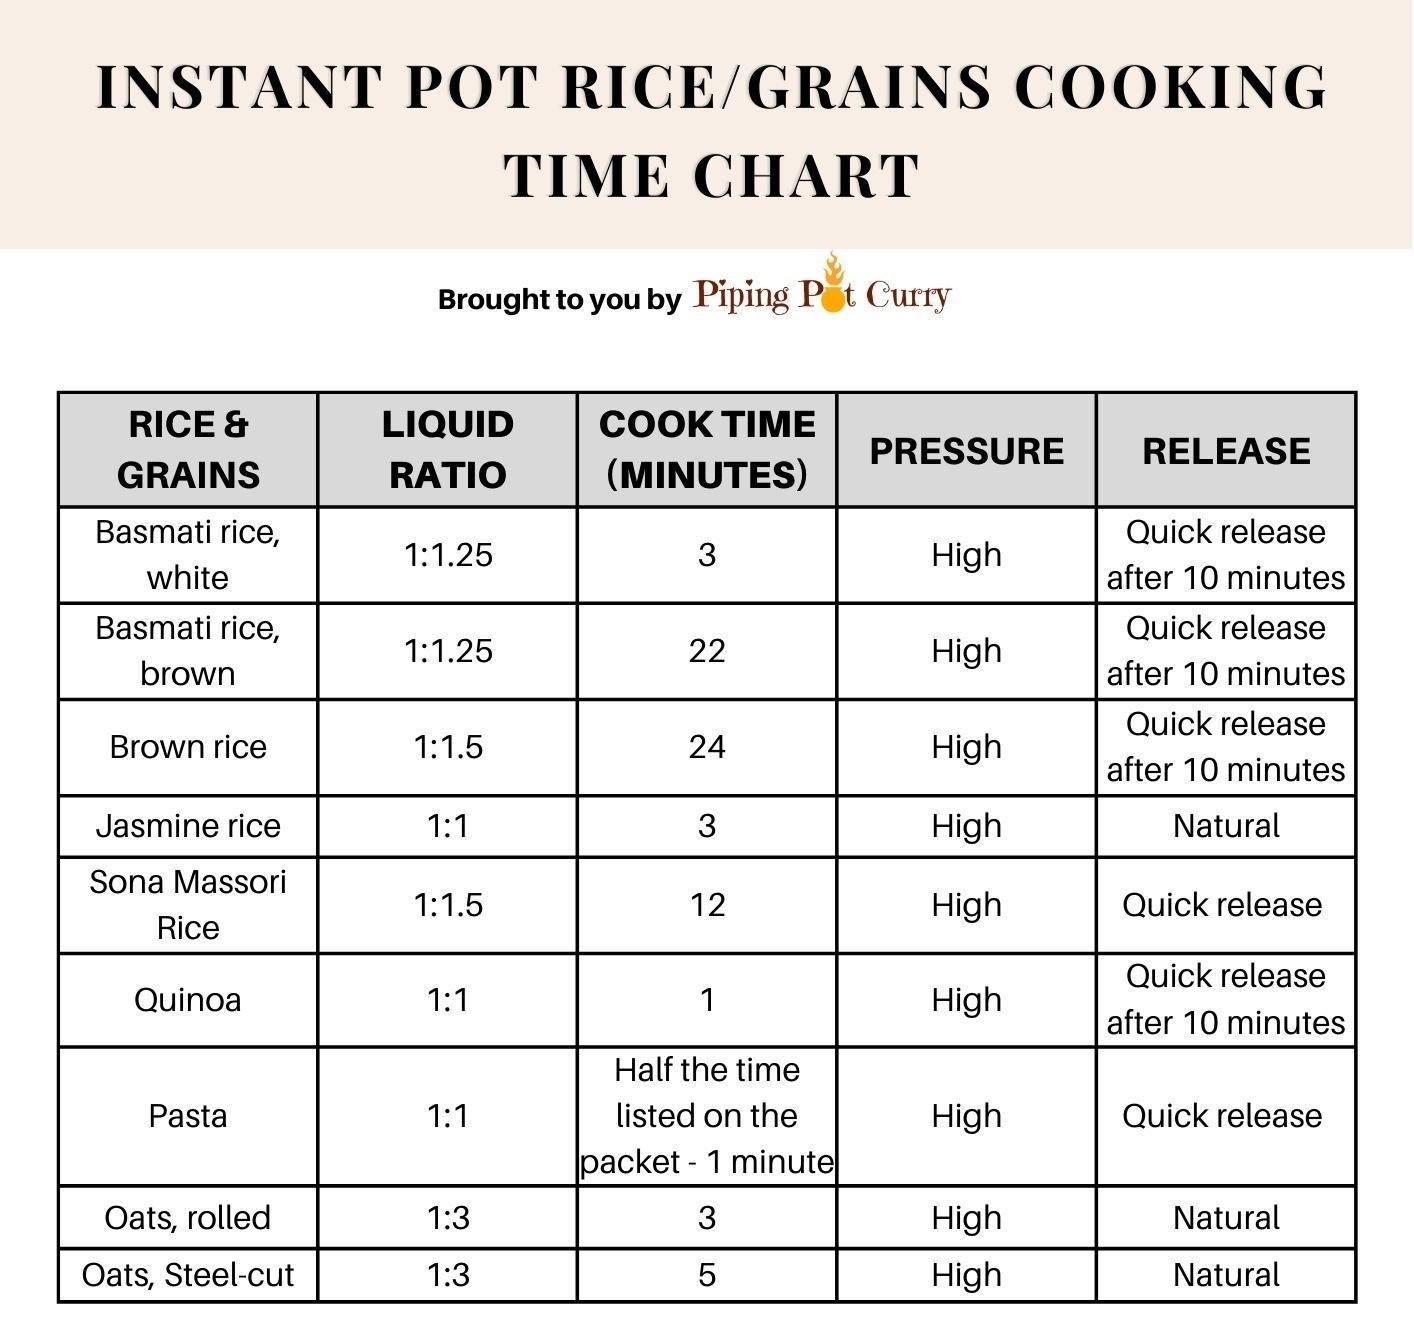 Rice/grains cooking time chart